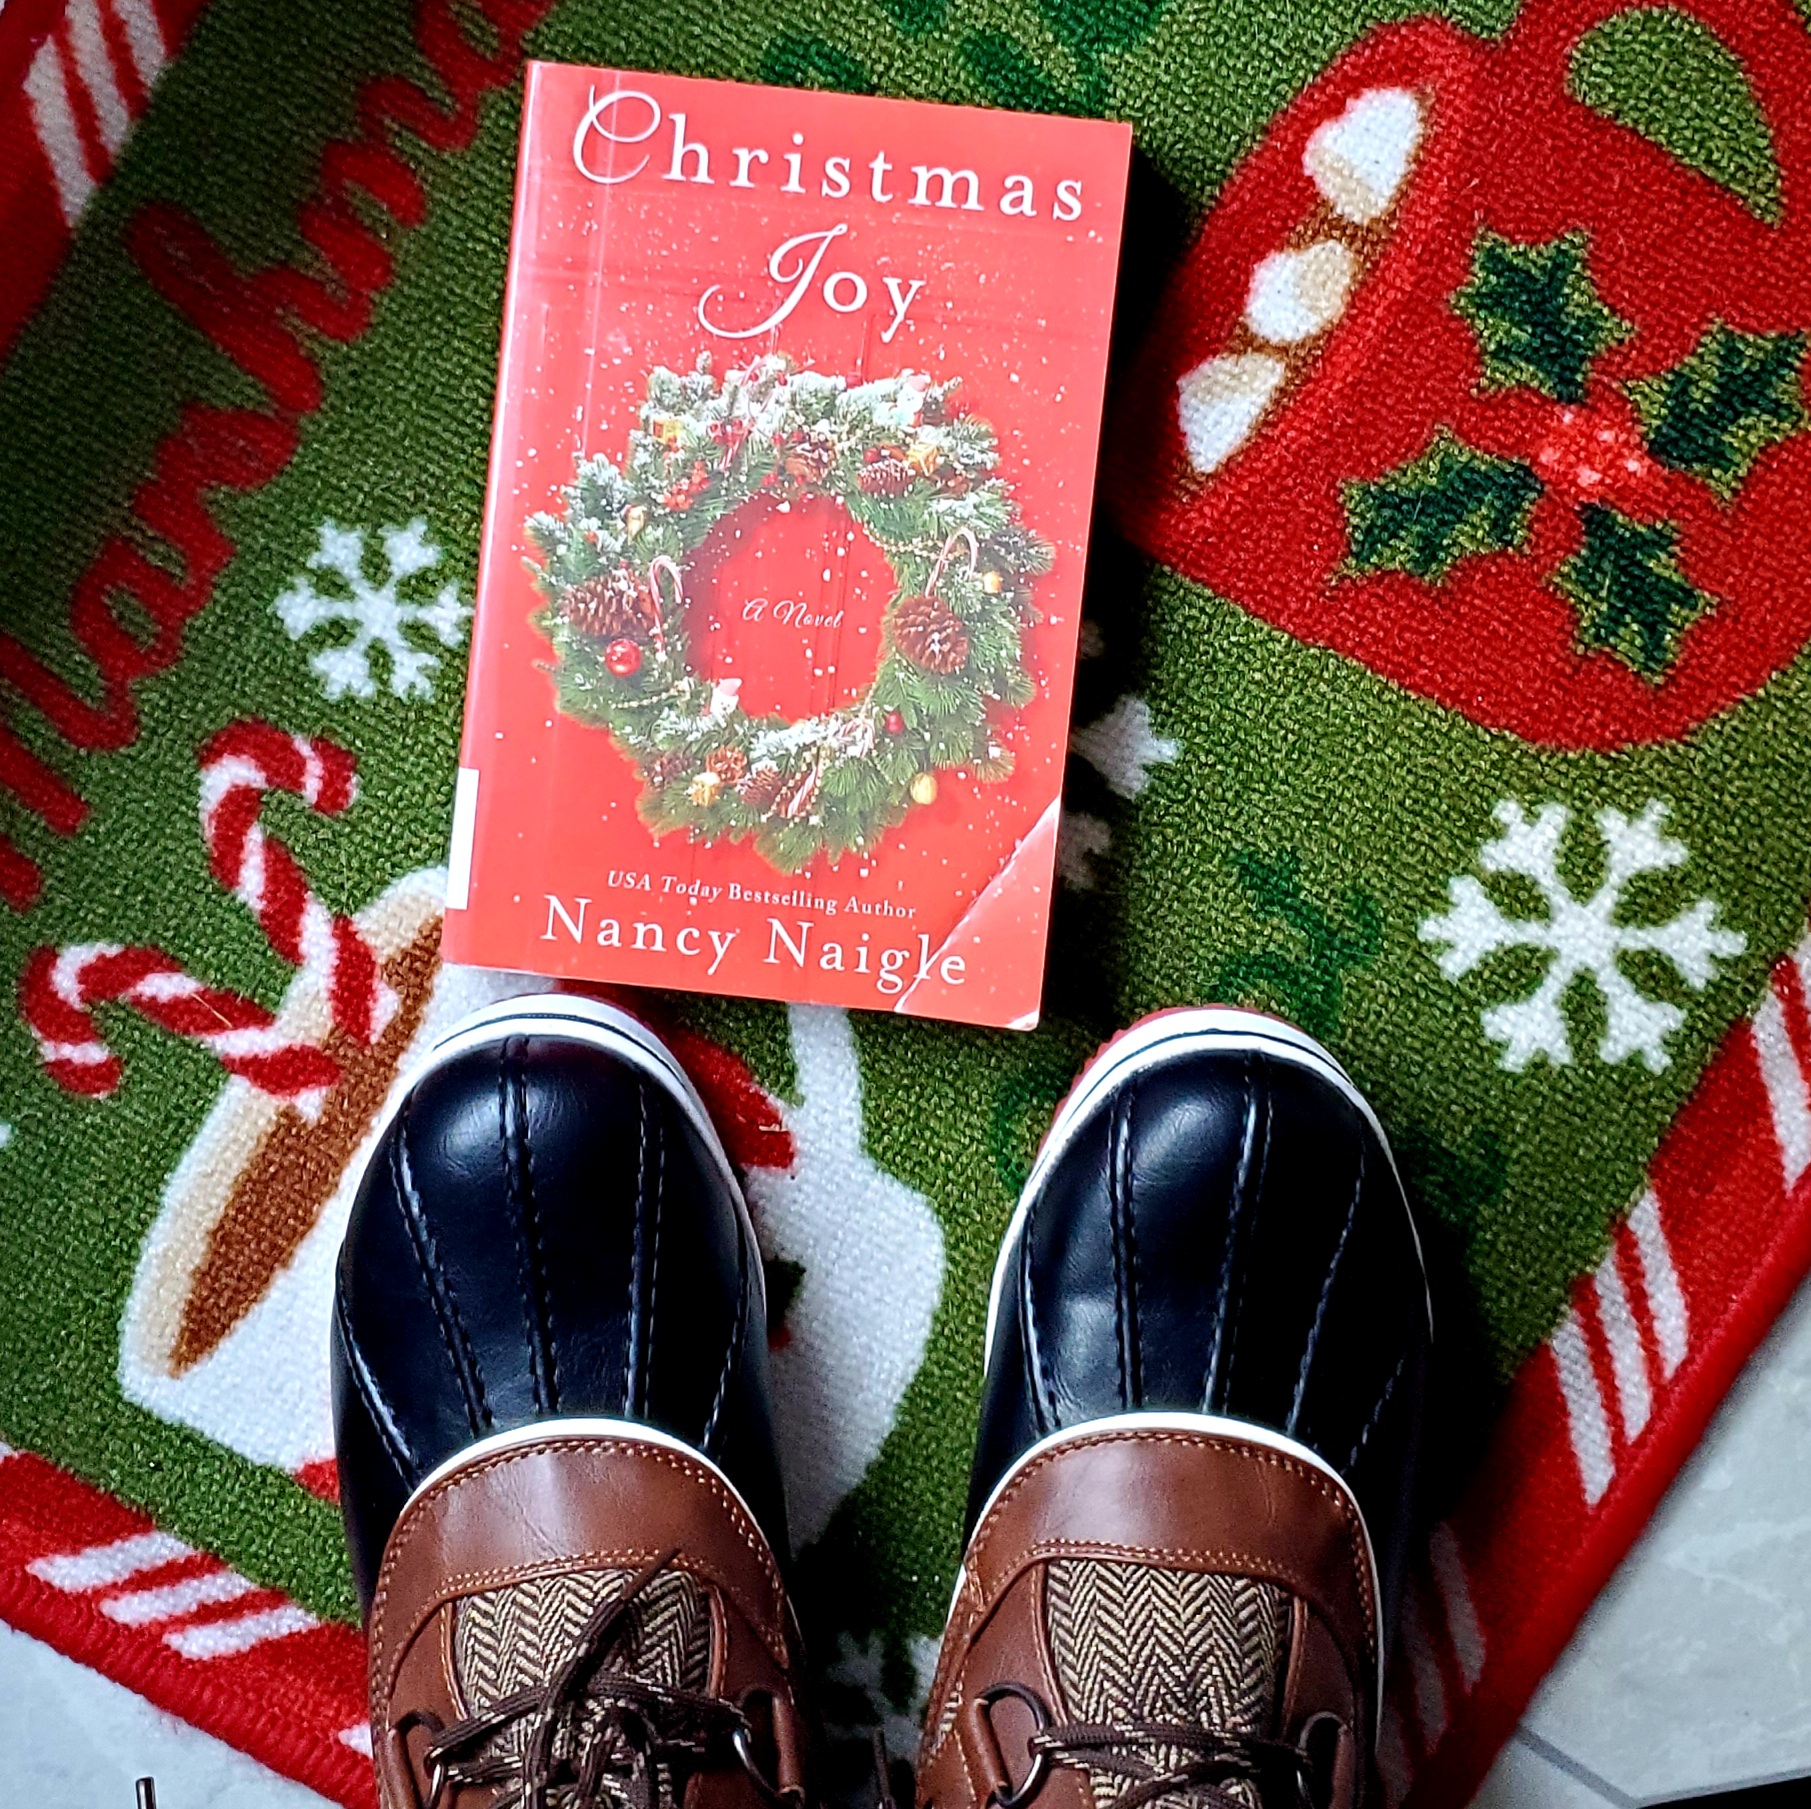 Book Review of CHRISTMAS JOY